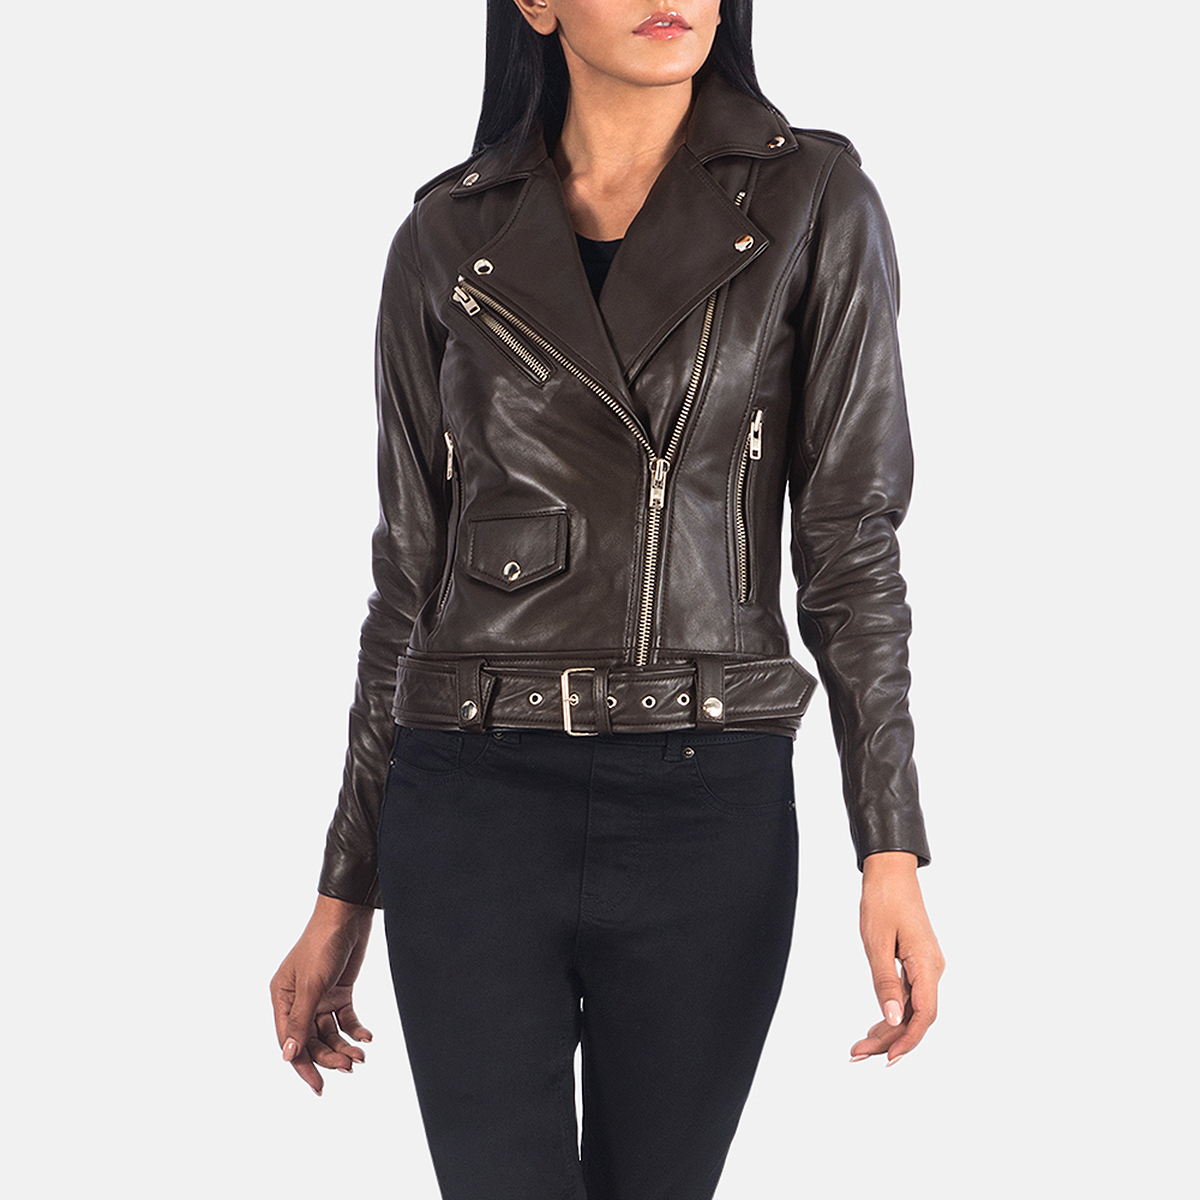 The Jacket Maker Review: Feminine Leather Jackets - Lizzie in Lace